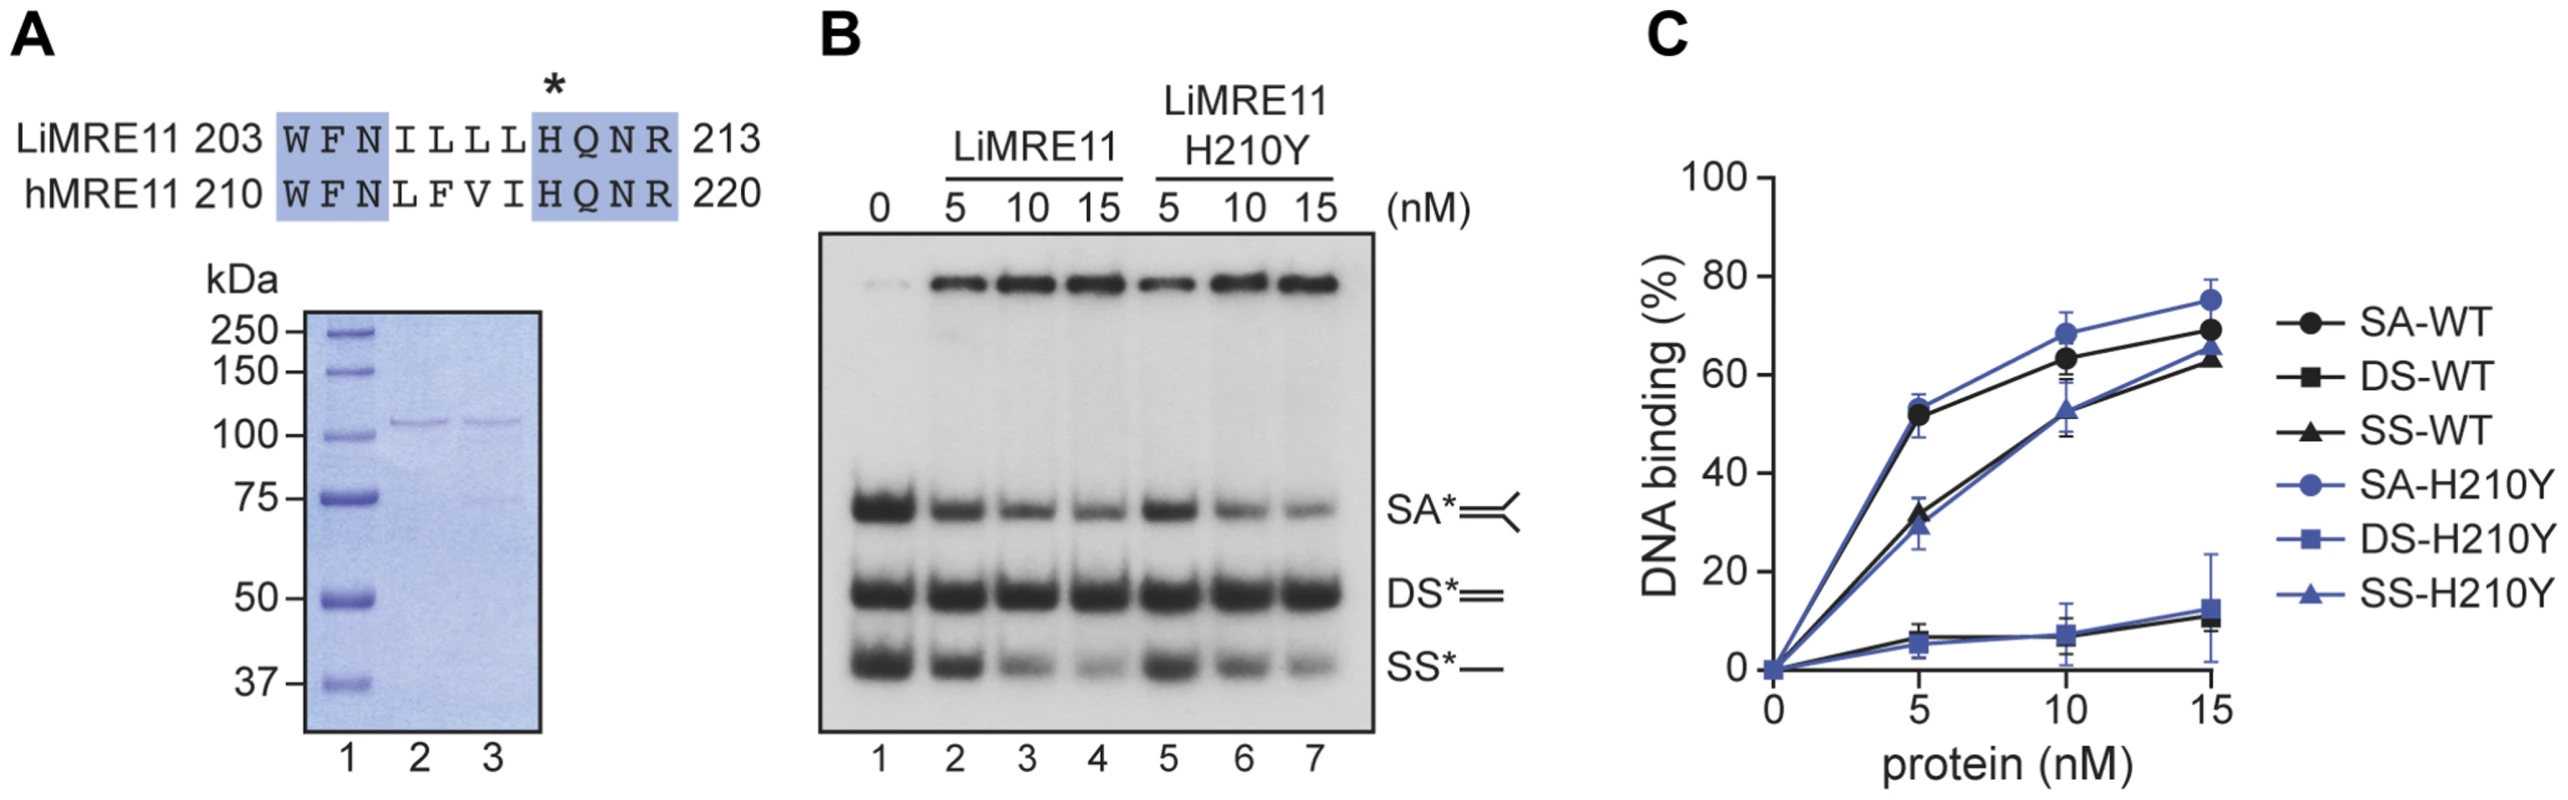 Purification and DNA binding of the <i>L. infantum</i> MRE11 protein.